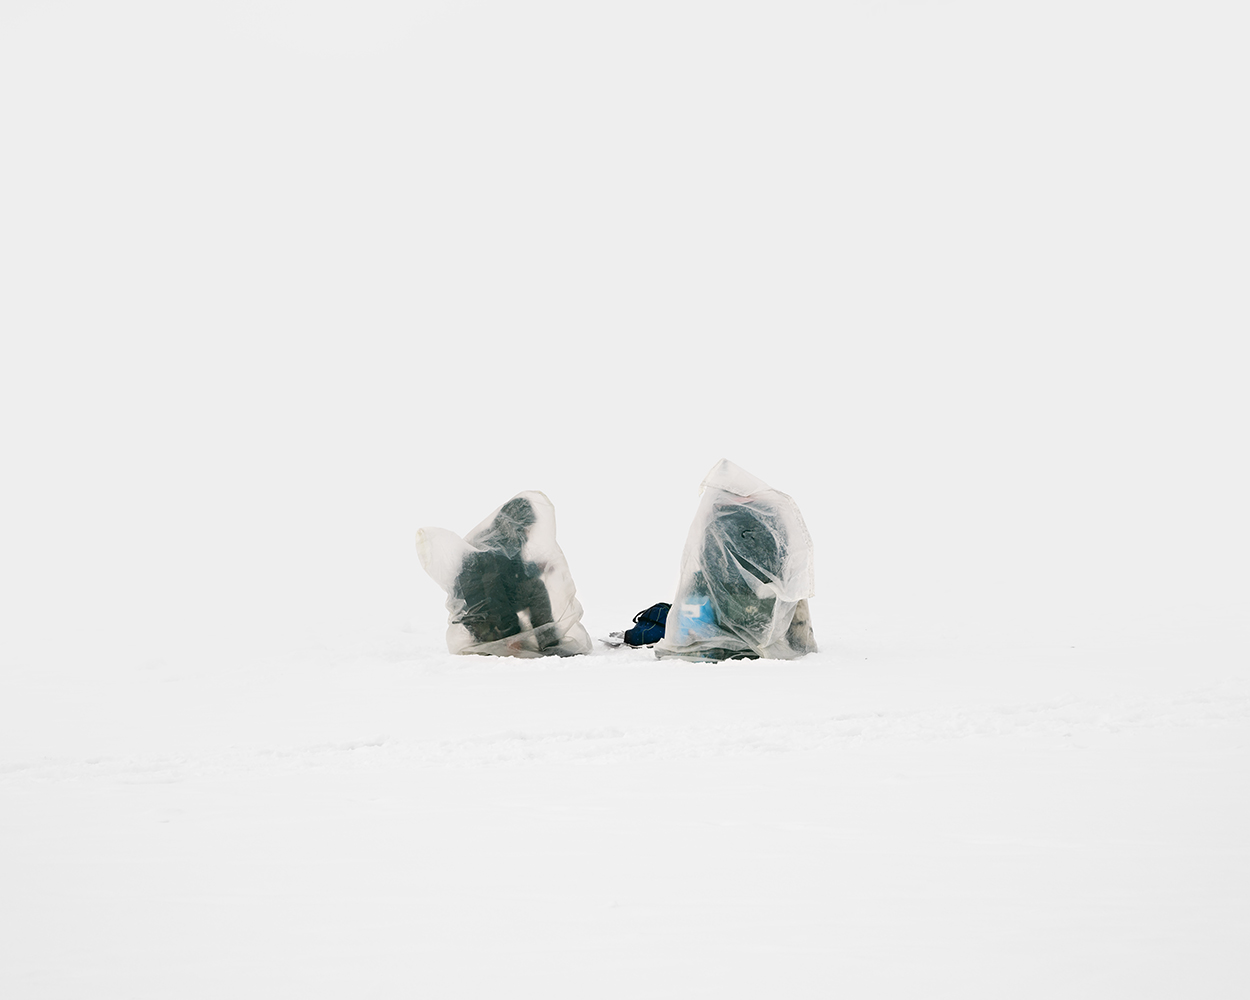   Untitled  from the series  Ice Fishers , 2016 